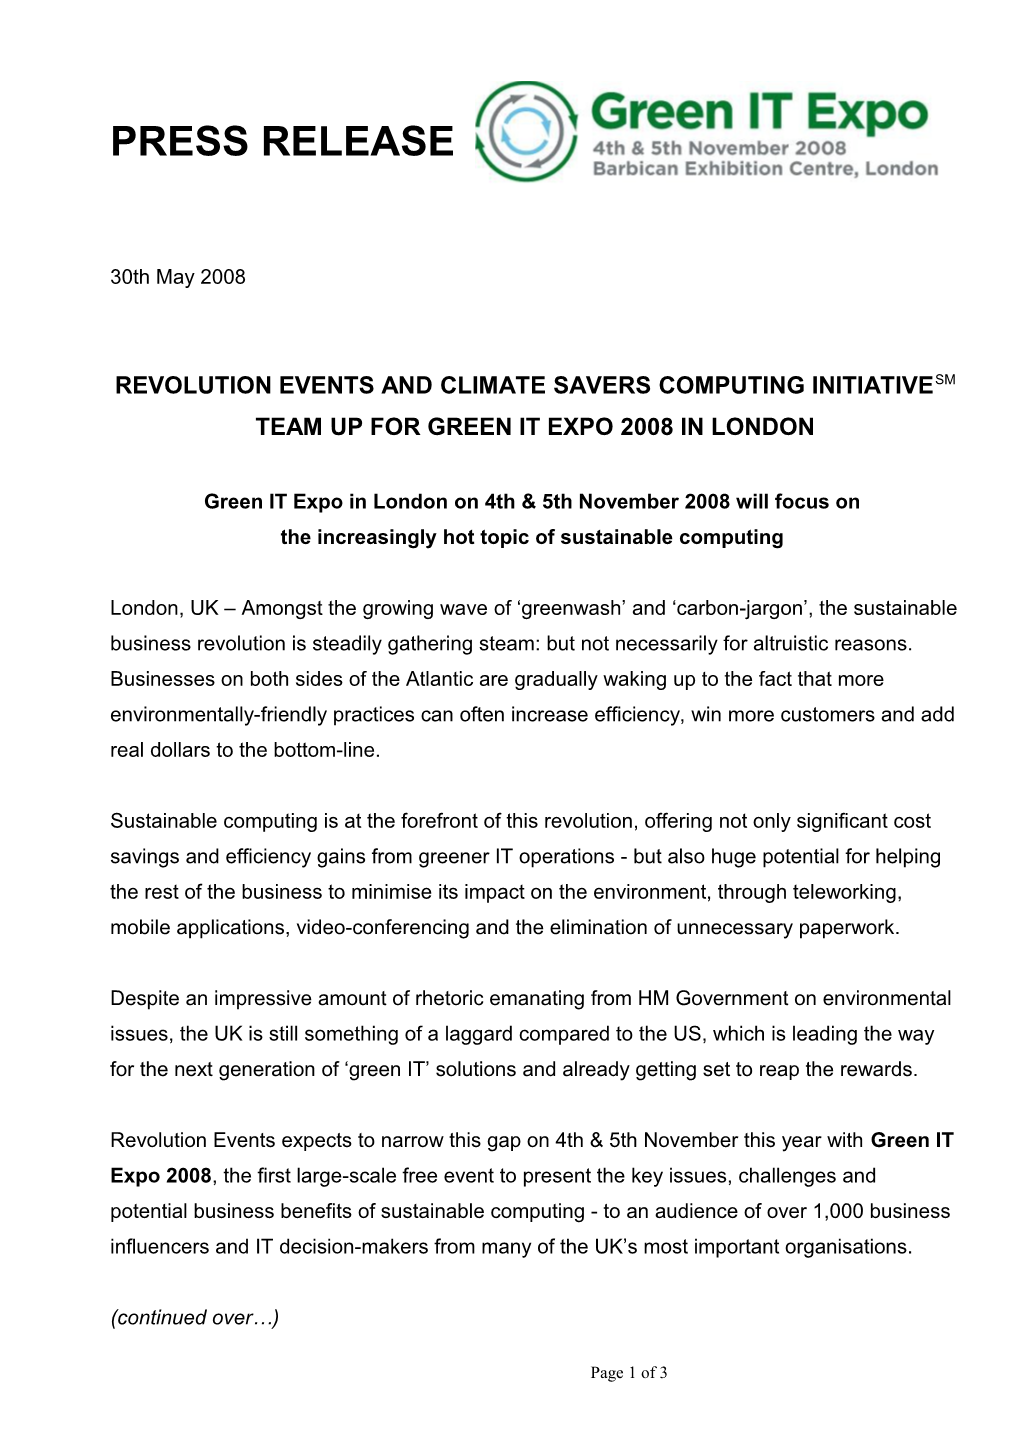 Revolution Events Team up with Global Climate Savers Computing Initiative to Present Green